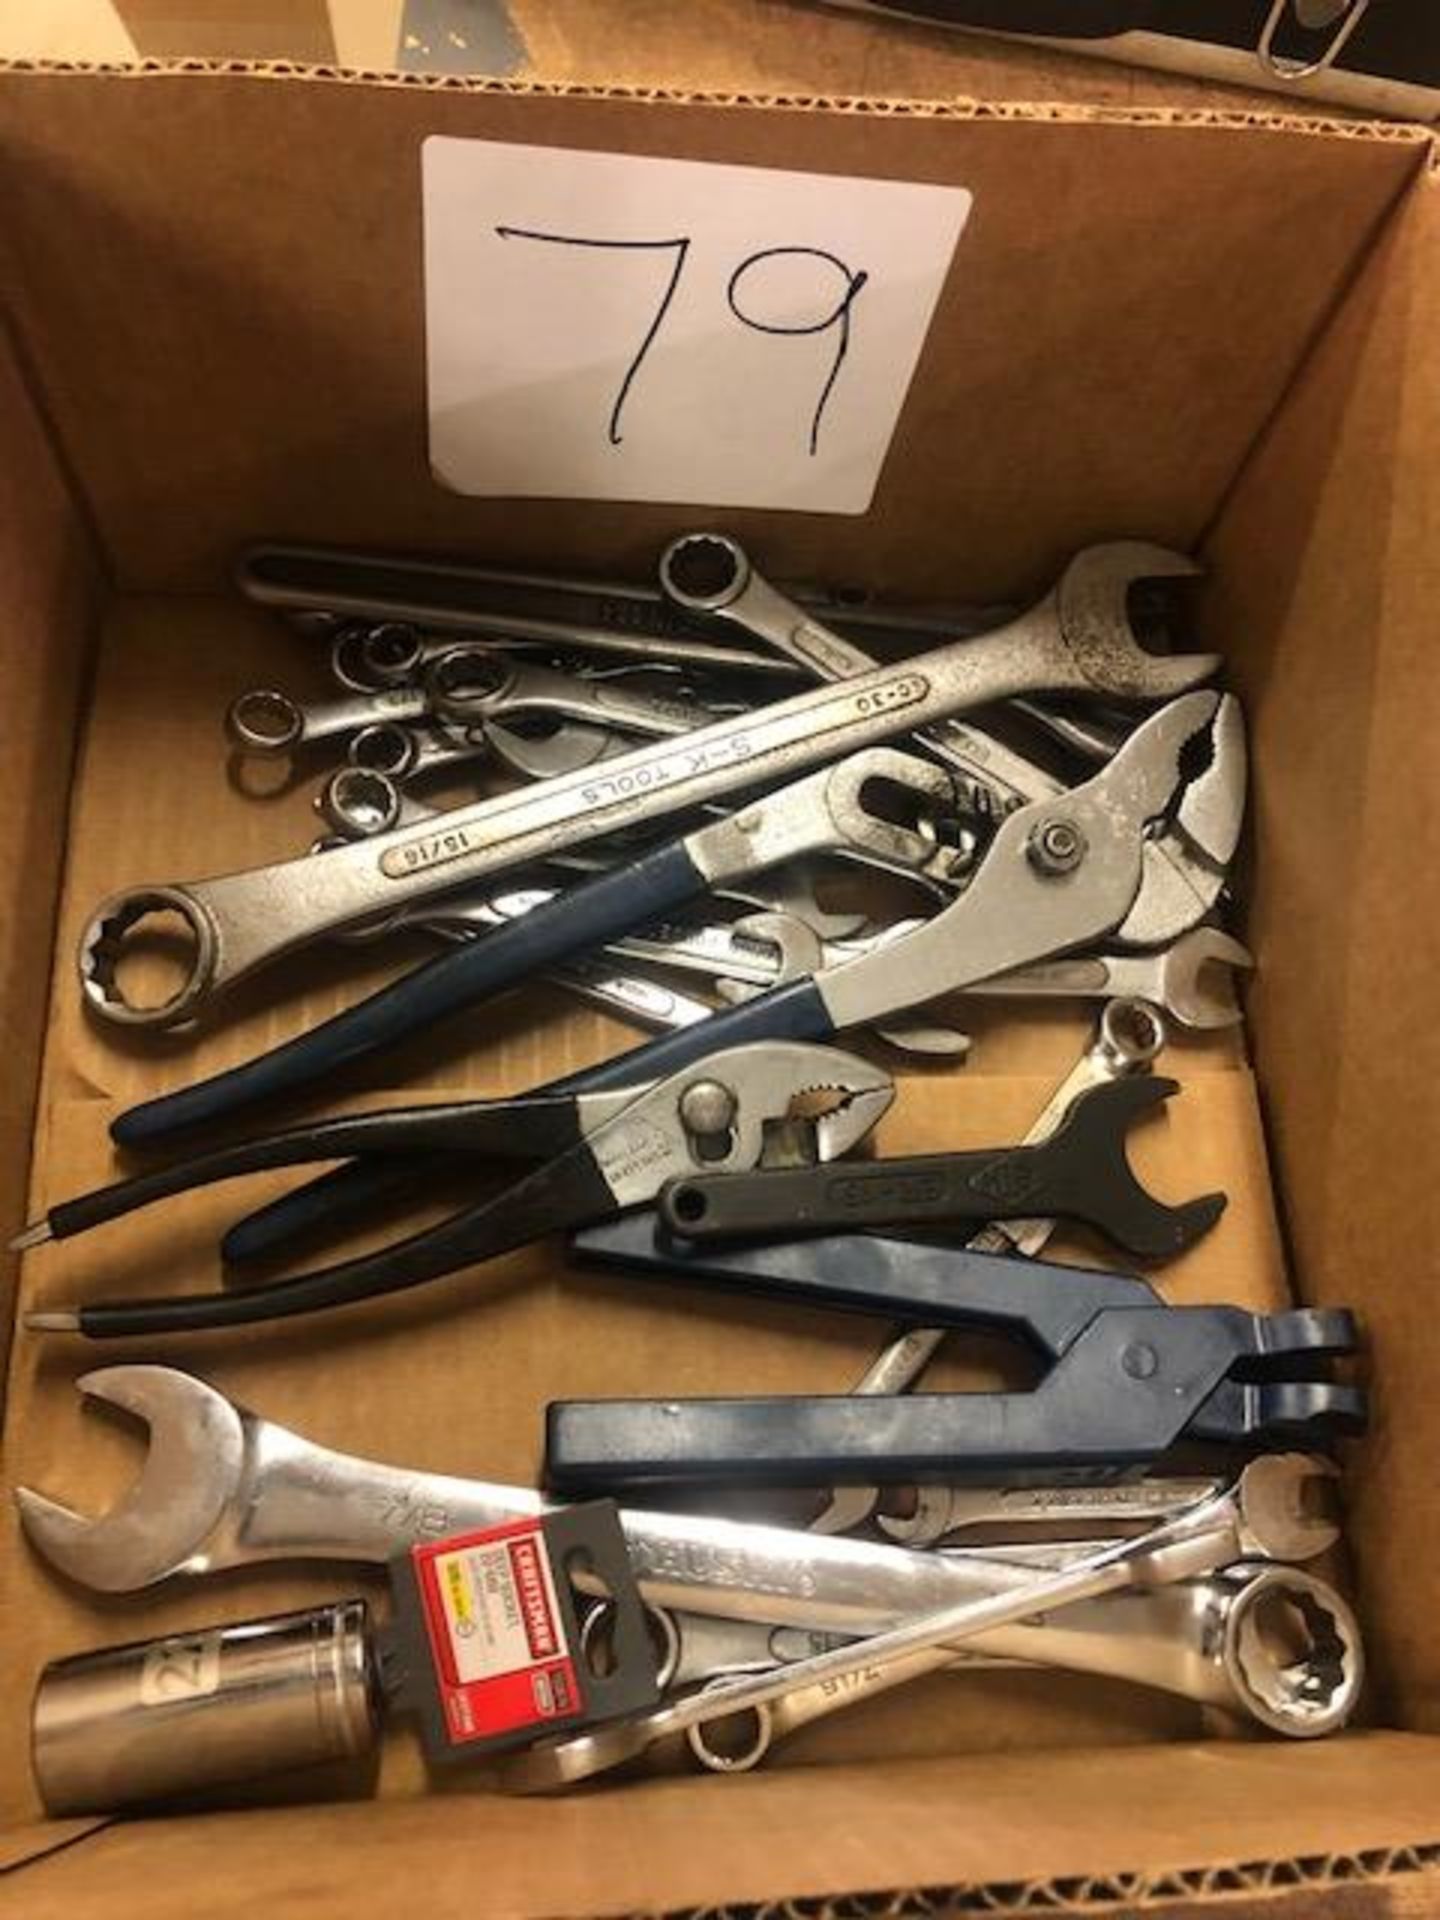 Box of various wrenches